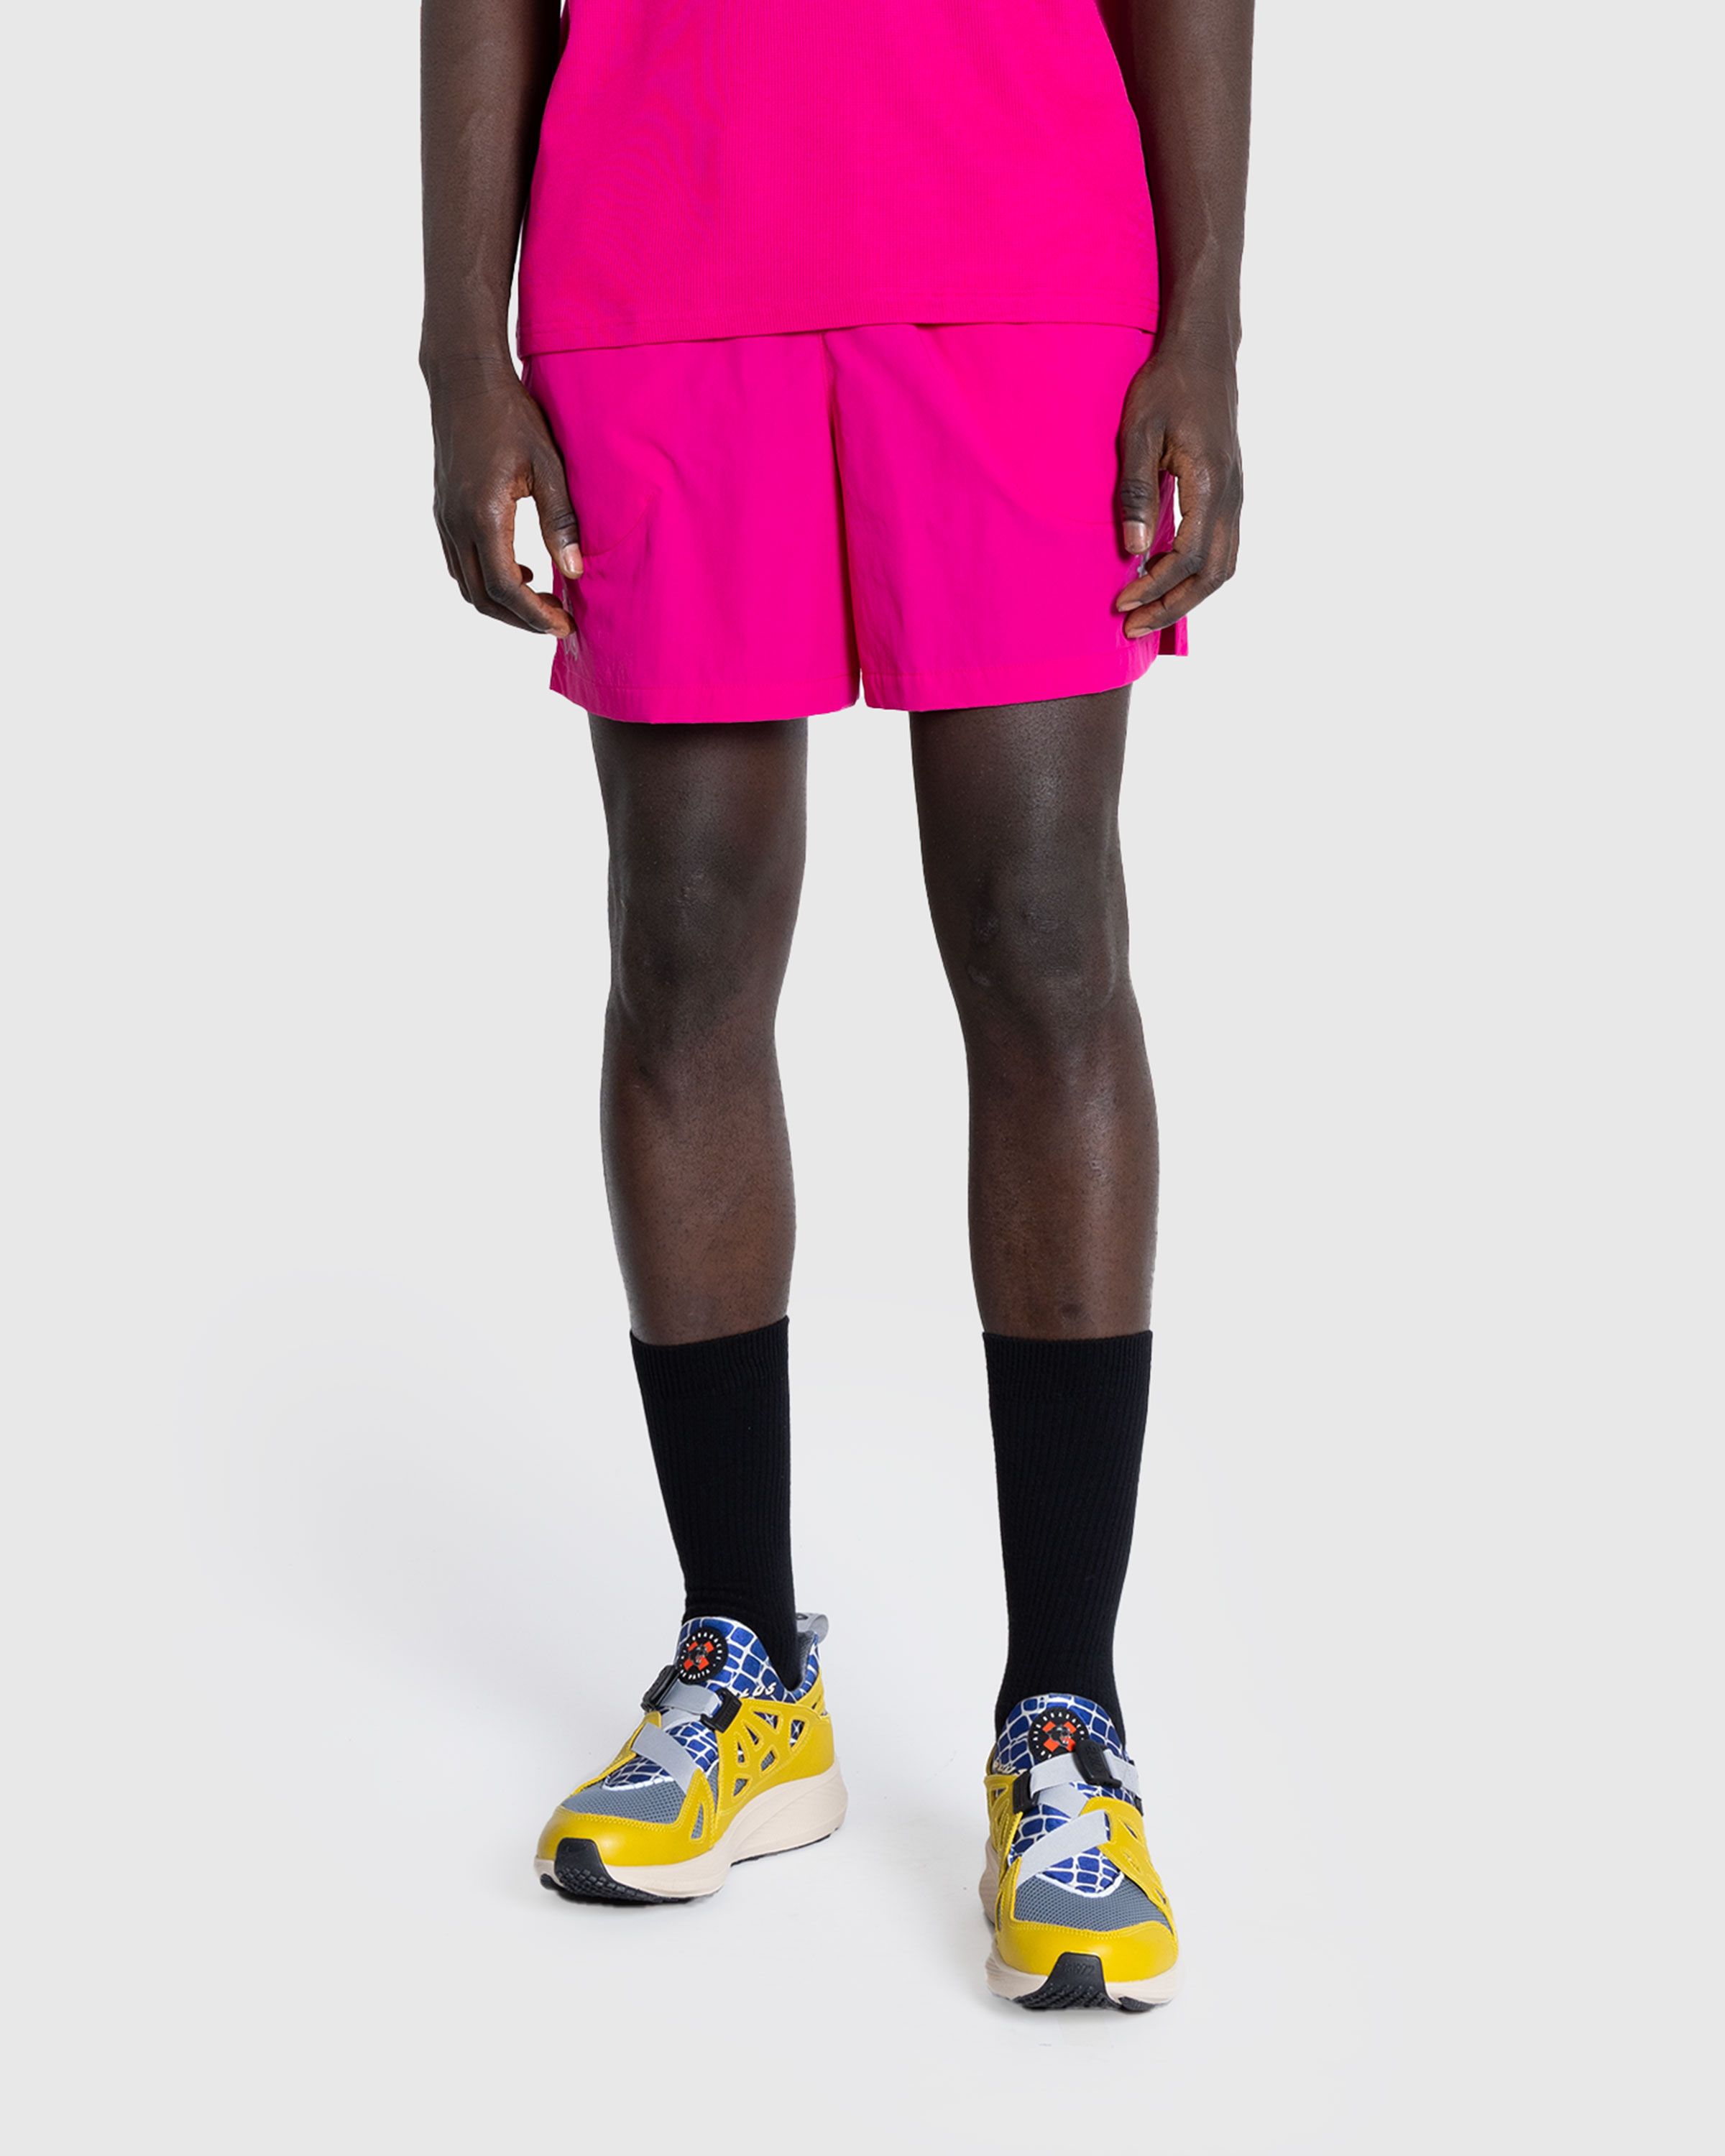 Nike x Patta – Men's Shorts Fireberry - Active Shorts - Red - Image 2